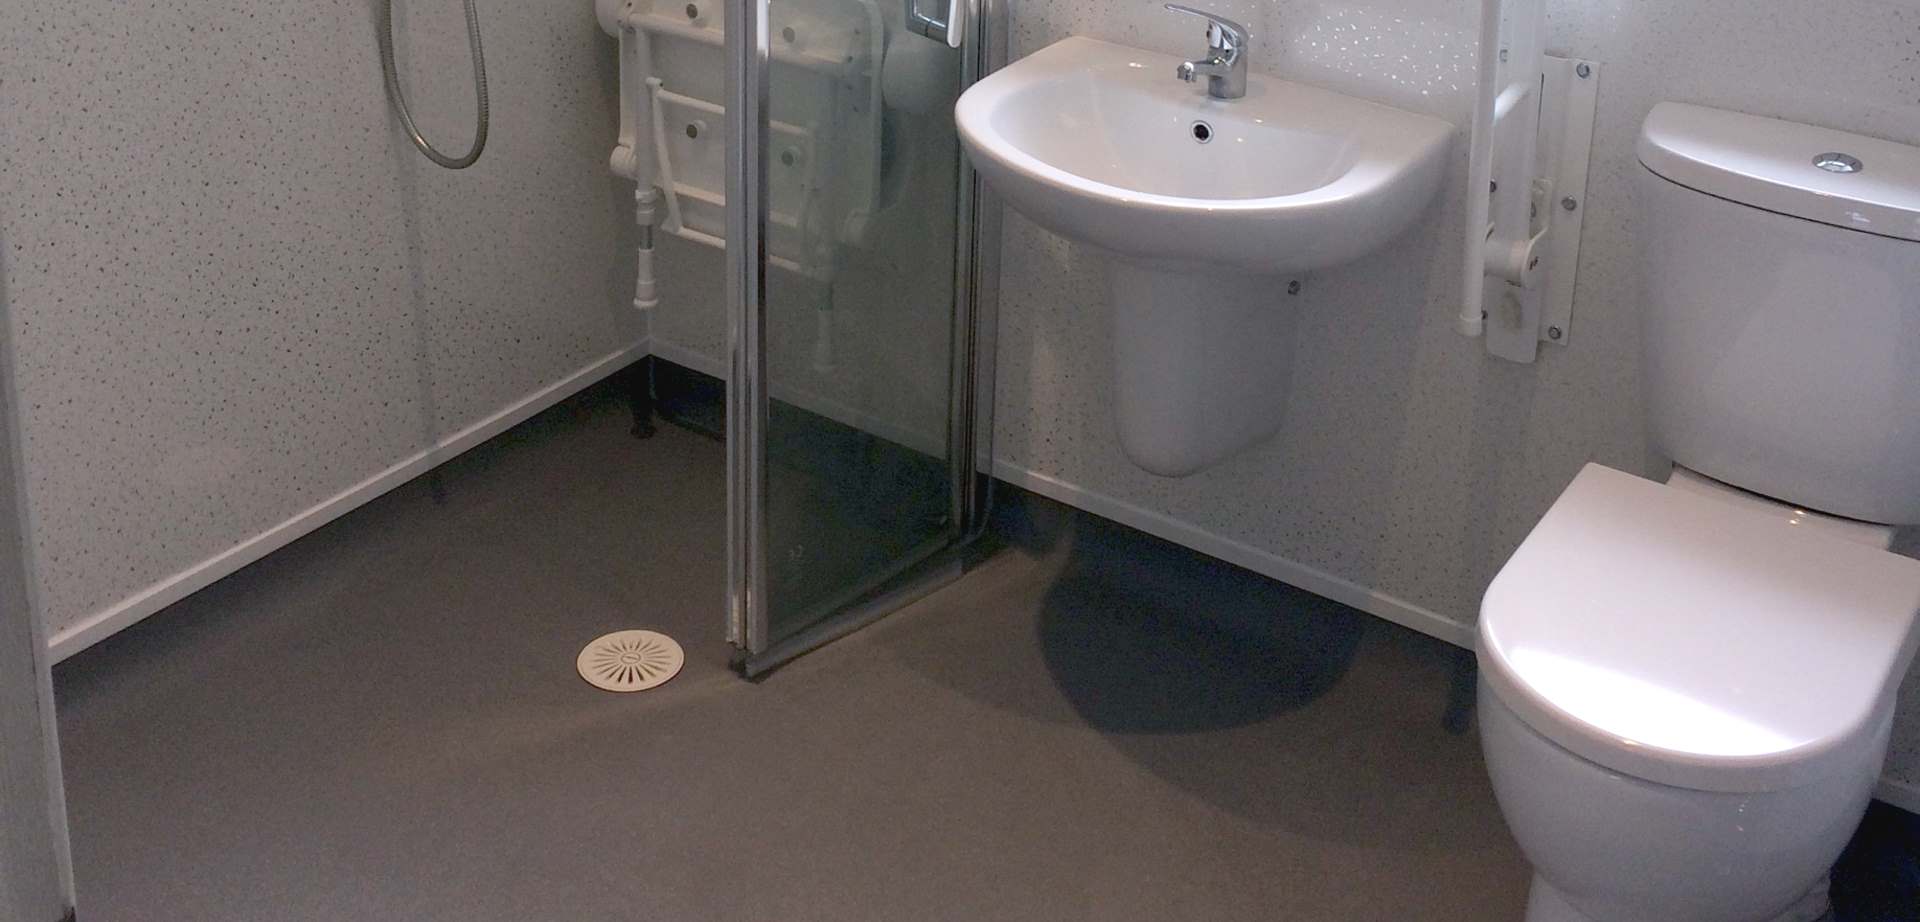 Wetroom Installers in Burton on Trent and The Midlands